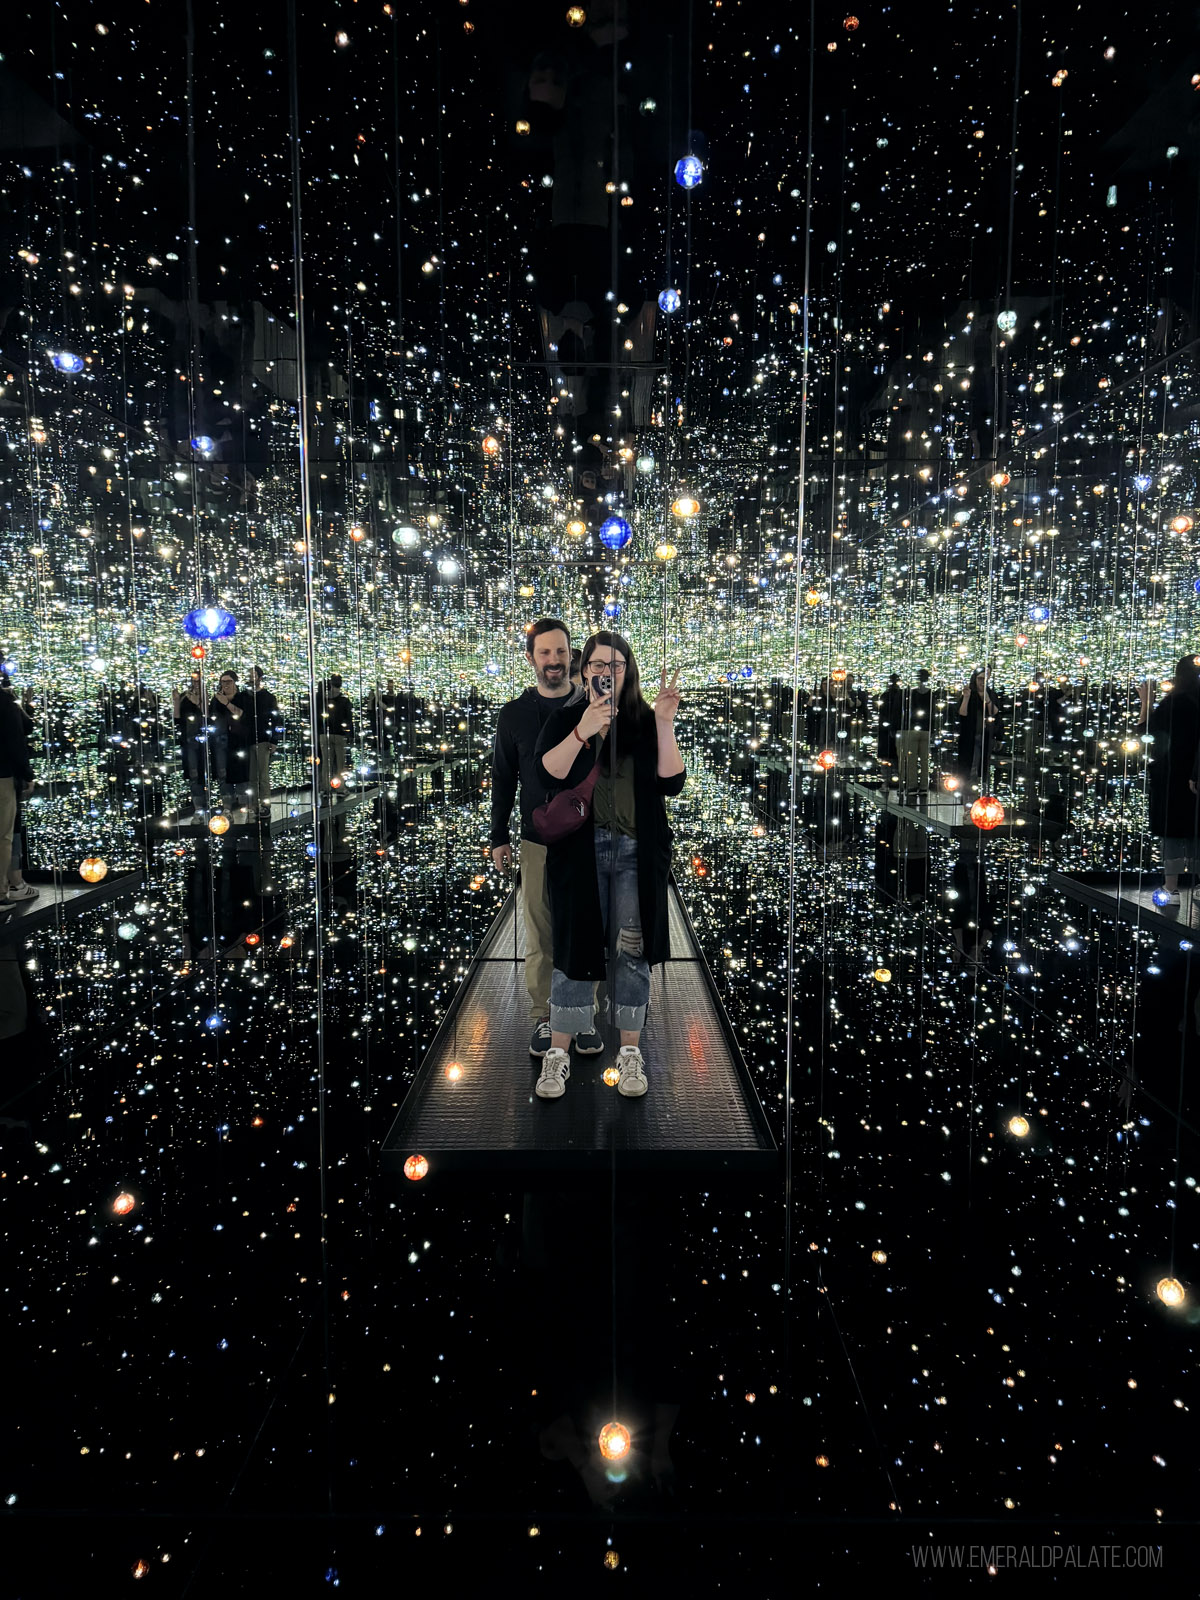 Infinity Mirrors exhibit at The Broad Museum in LA